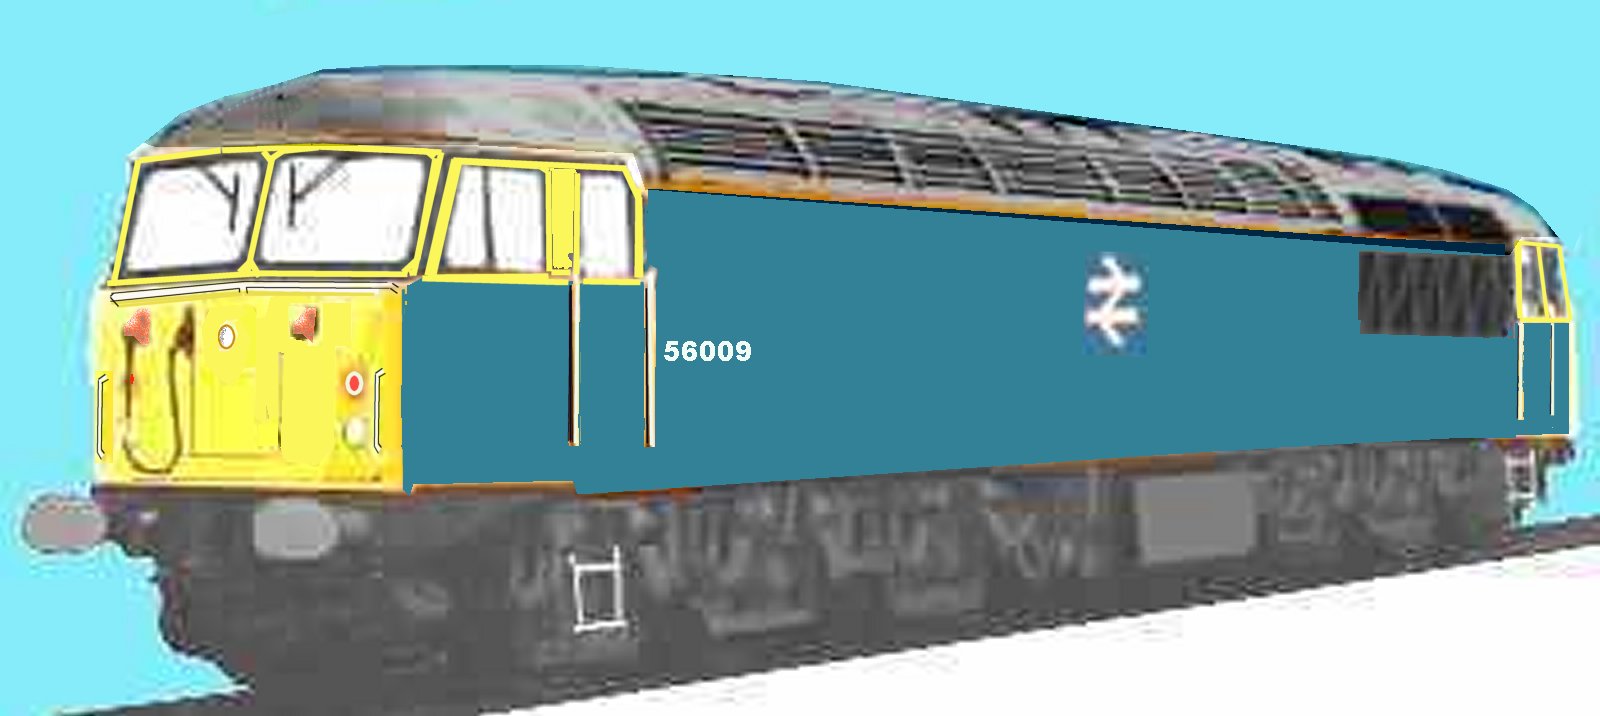 Sketch of the Class 56 heavy freight loco in original livery